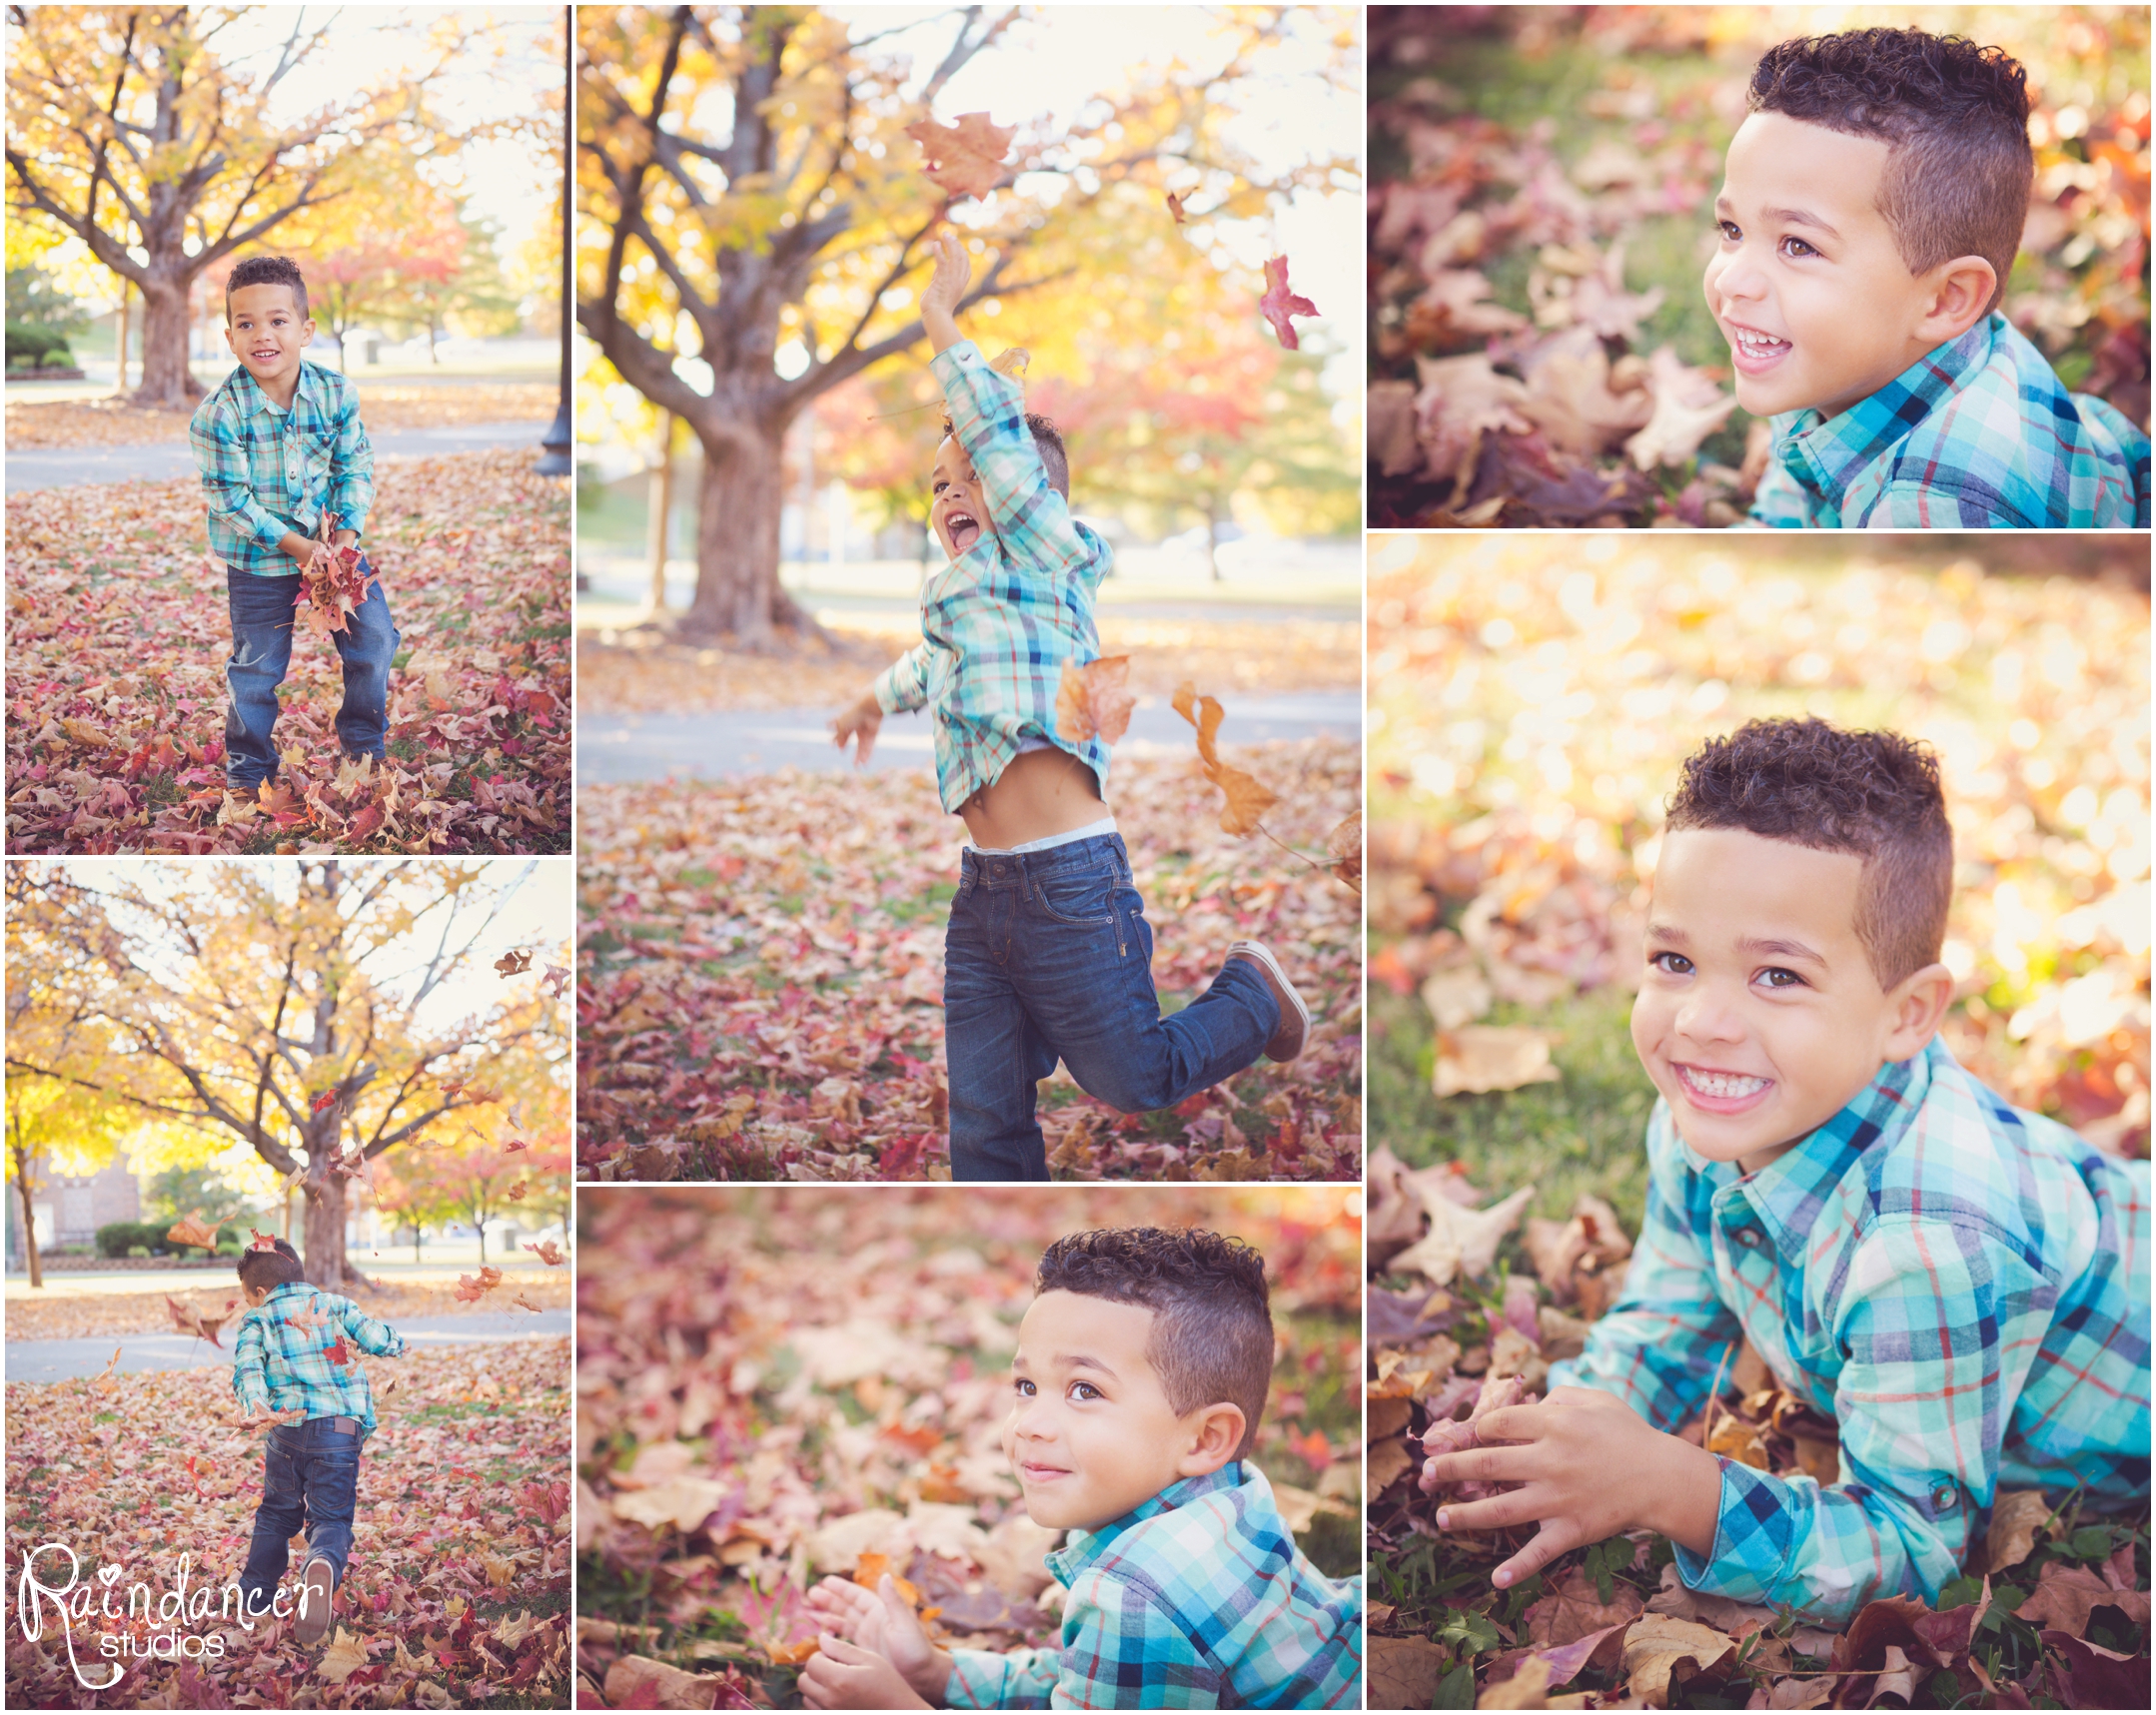 Indianapolis Family Photographer, Indy family photographer, Indianapolis family photography, Indy family photography, Indianapolis children photographer, Indy children photographer, Indianapolis children photography